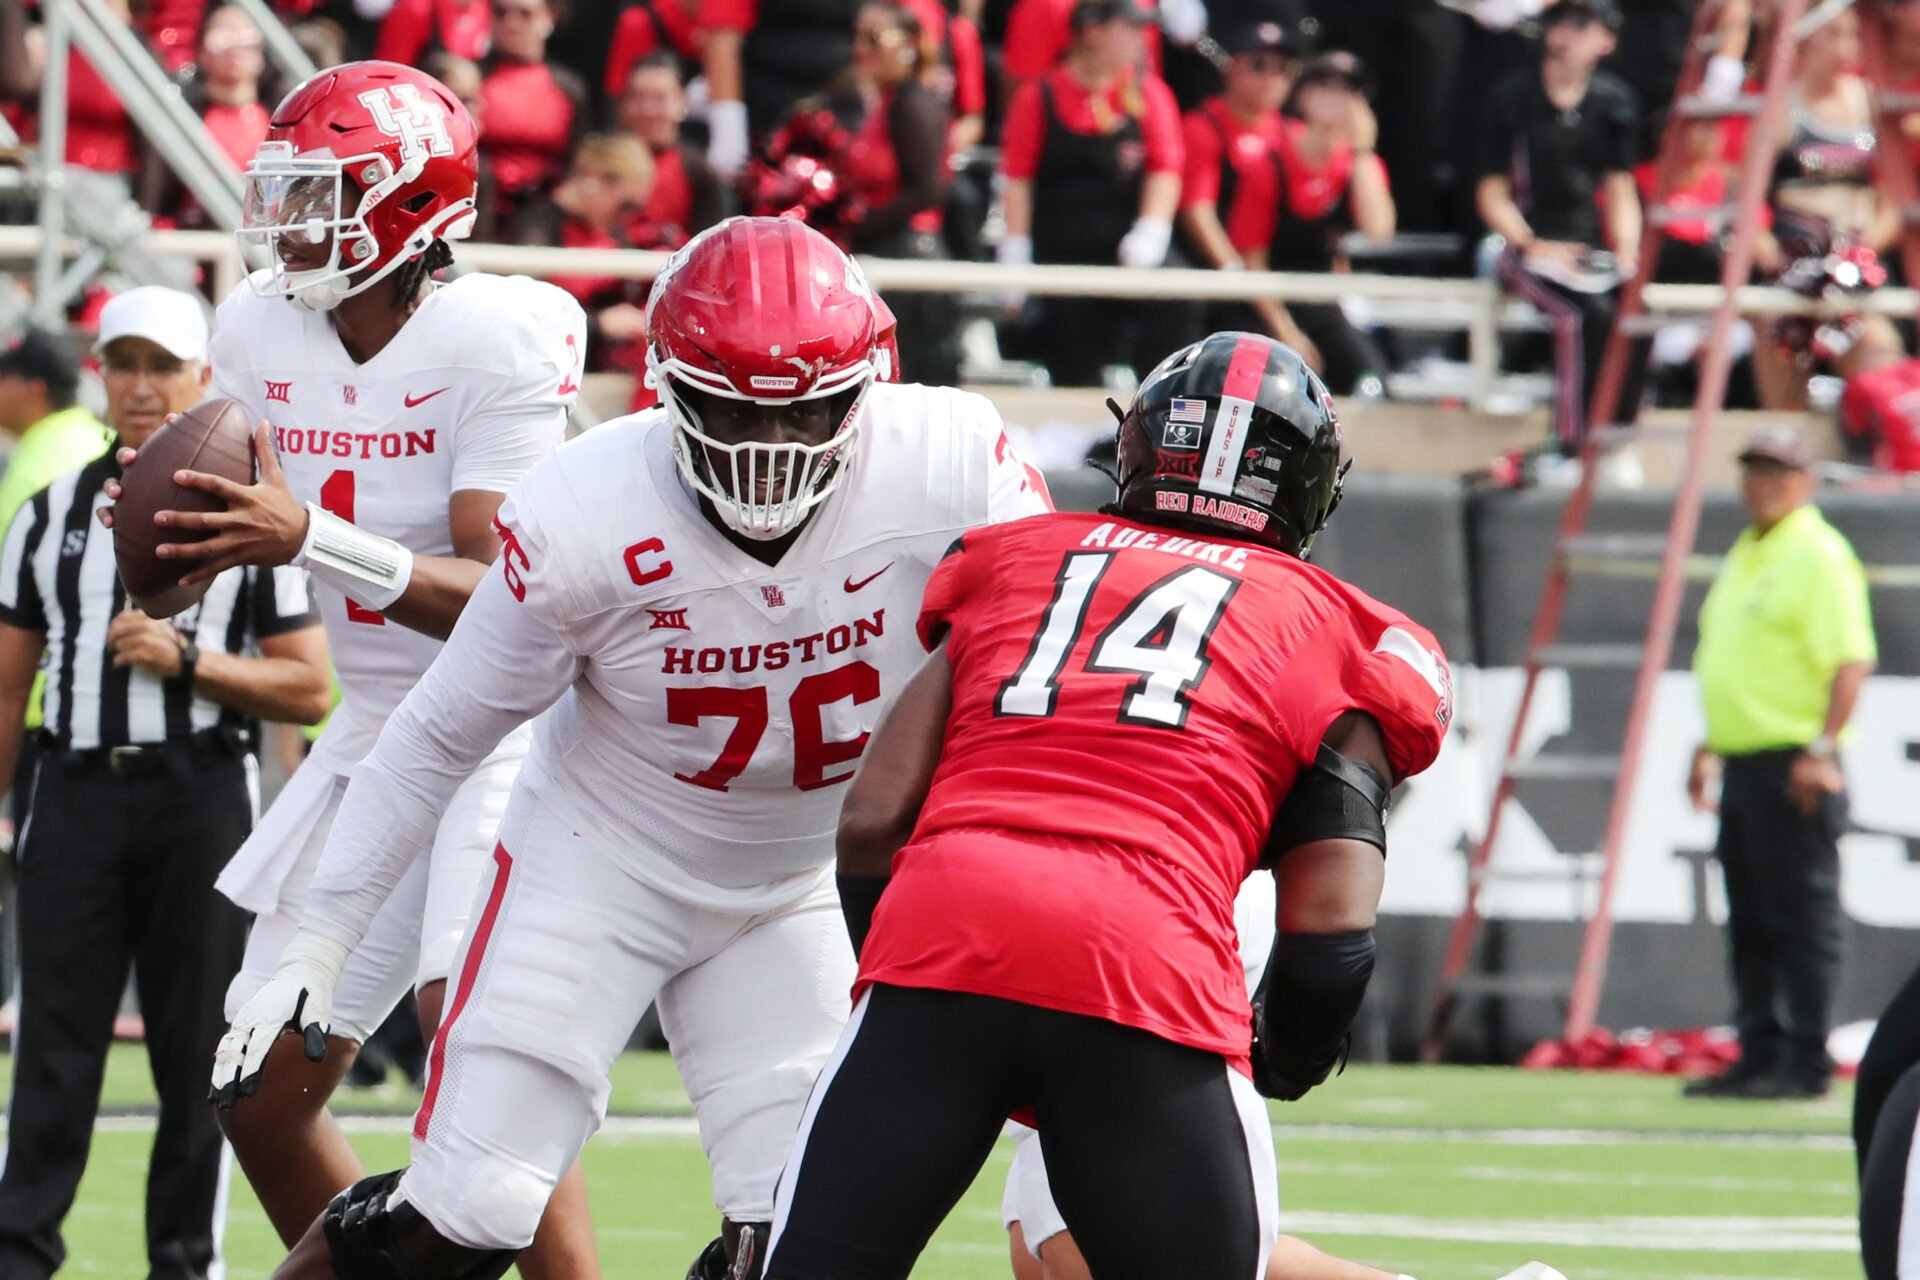 Houston Cougars offensive tackle Patrick Paul (76) blocks Texas Tech Red Raiders defensive end Joseph Adedire (14) in the second half at Jones AT&T Stadium and Cody Campbell Field.